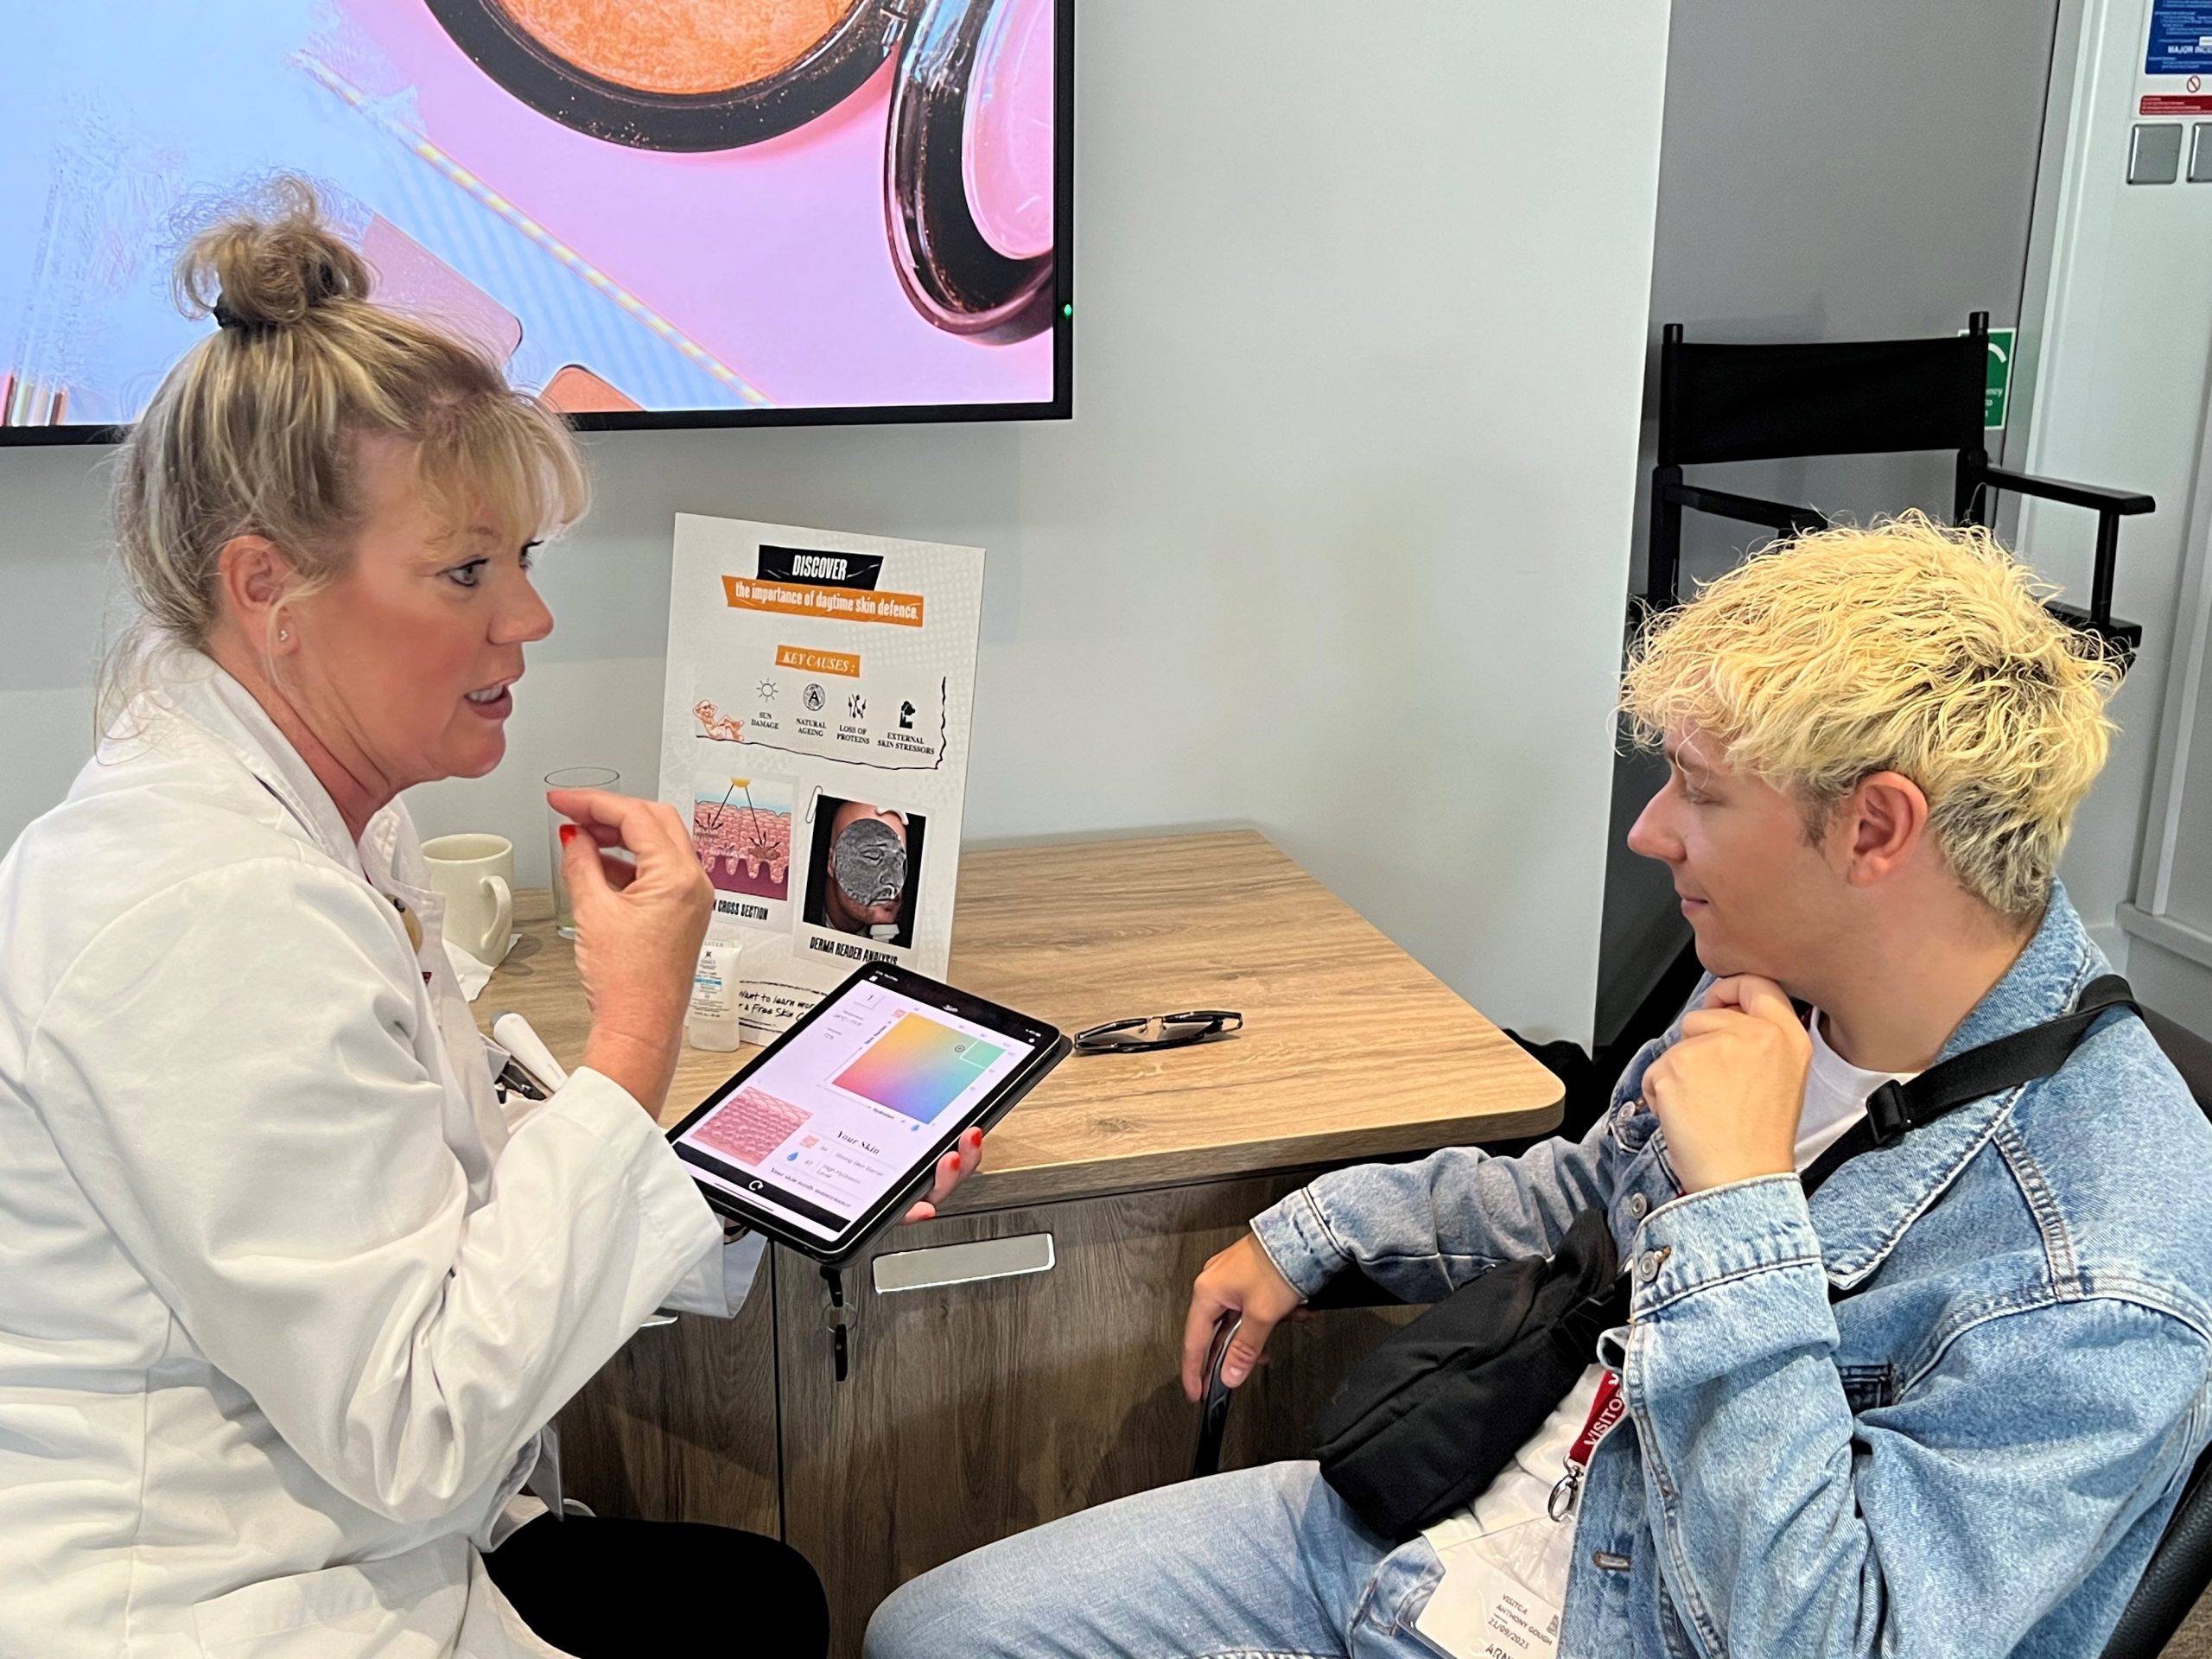 Anthony Gough, Greater Manchester SLC member, discussing skin care products during the make up event. They are seated at a desk, the technician is holding an iPad.